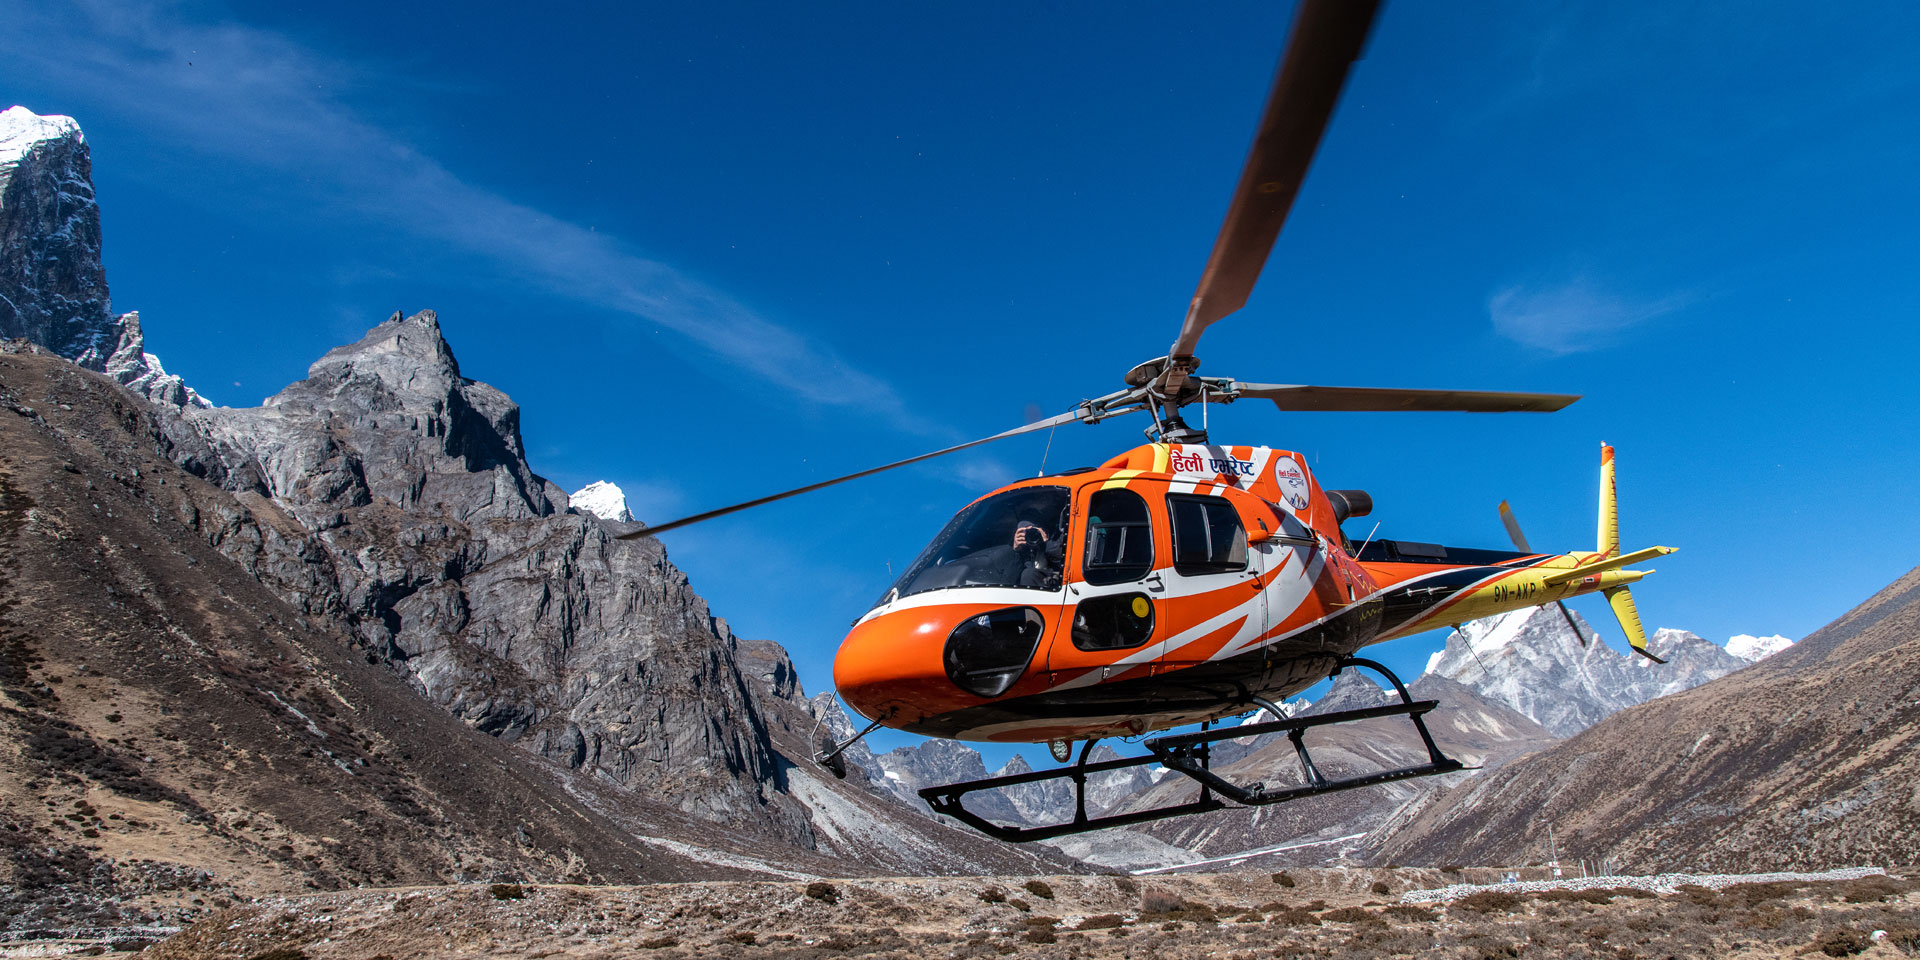 Helicopter takes off from Kalapattar in the Khumbu region of Nepal